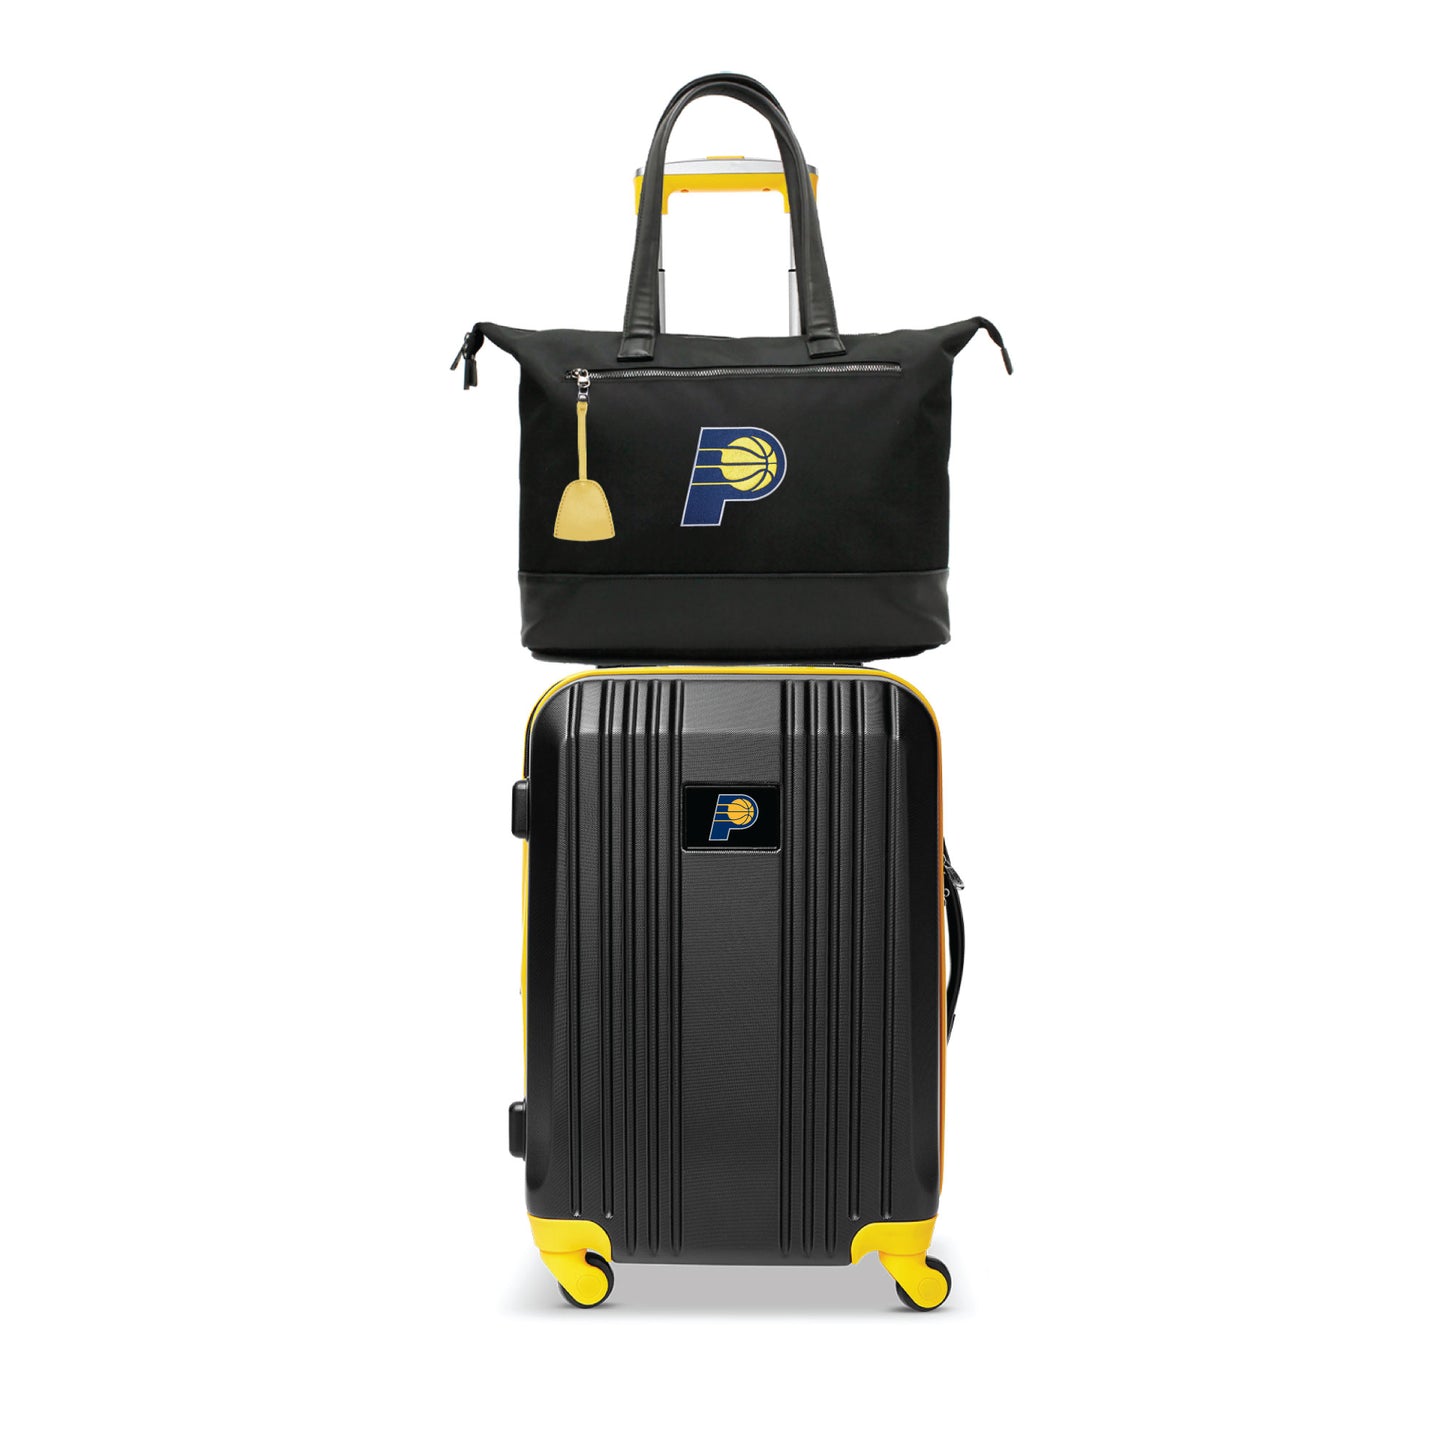 Indiana Pacers Premium Laptop Tote Bag and Luggage Set